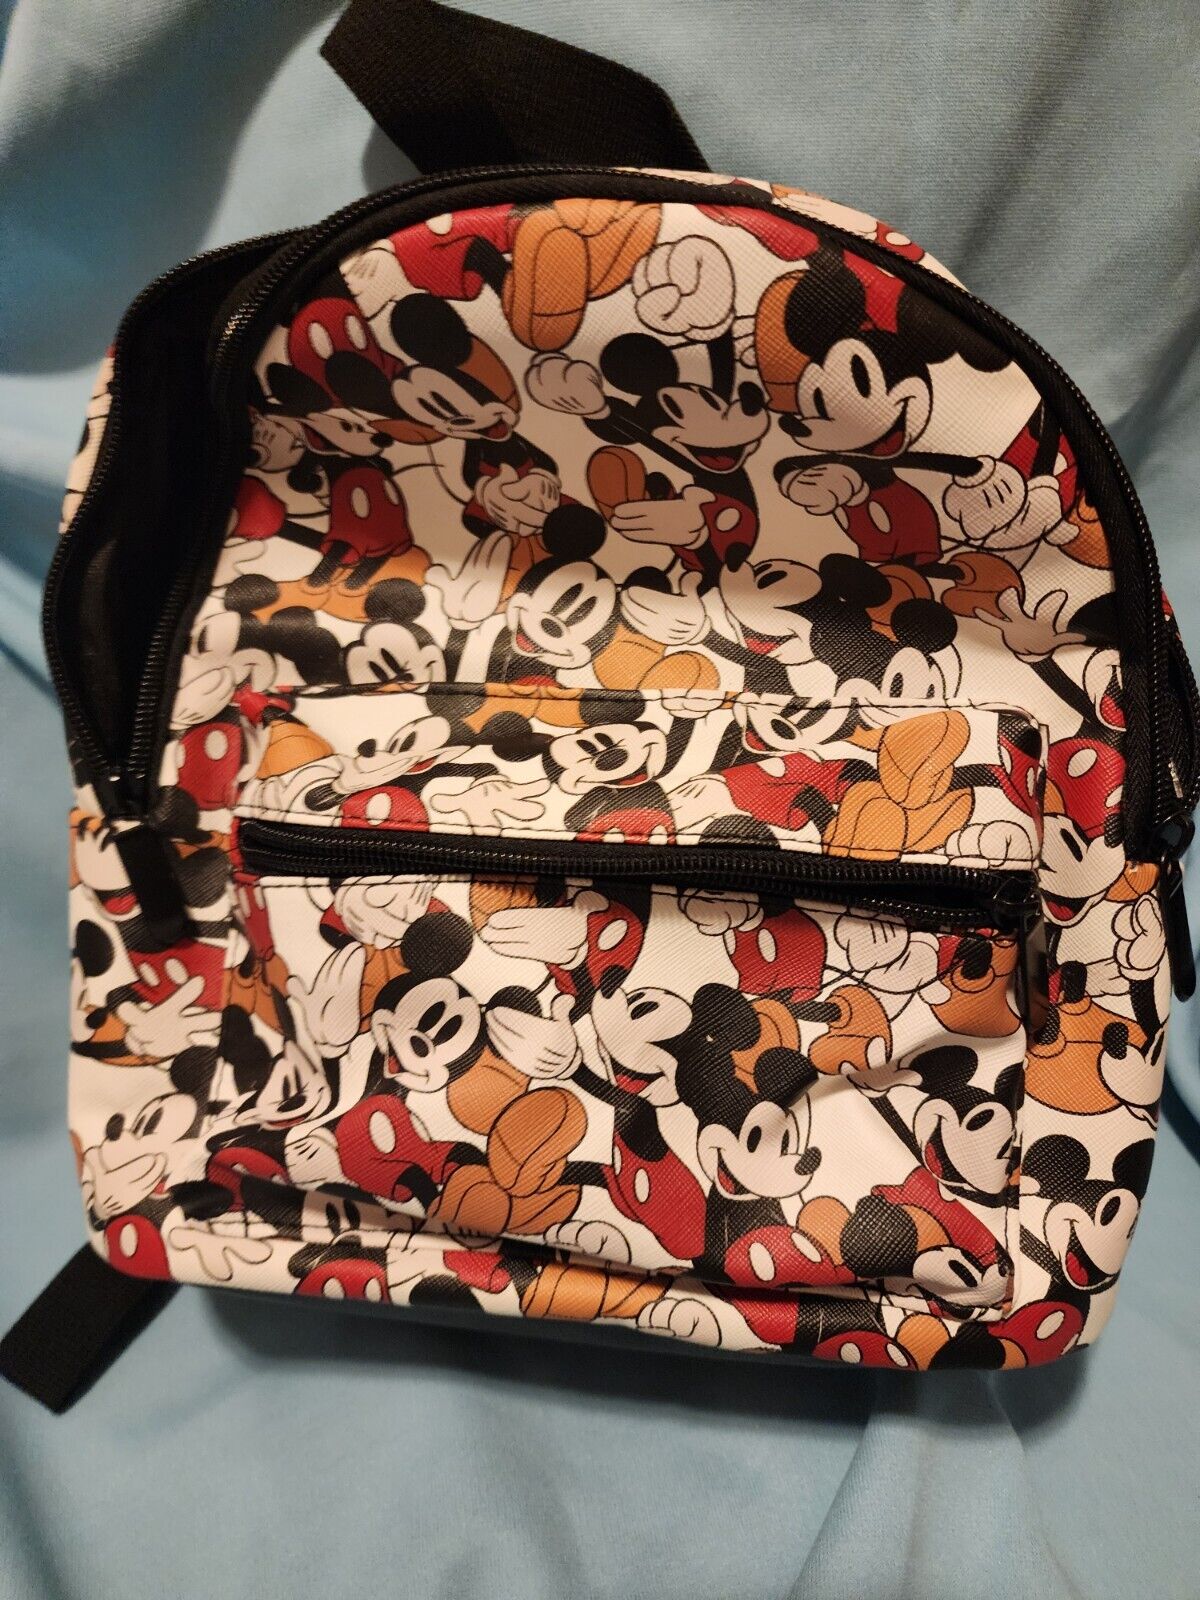 NWT BioWorld Disney Mickey Mouse Mini Backpack,All-Over Pattern Disney Accessory